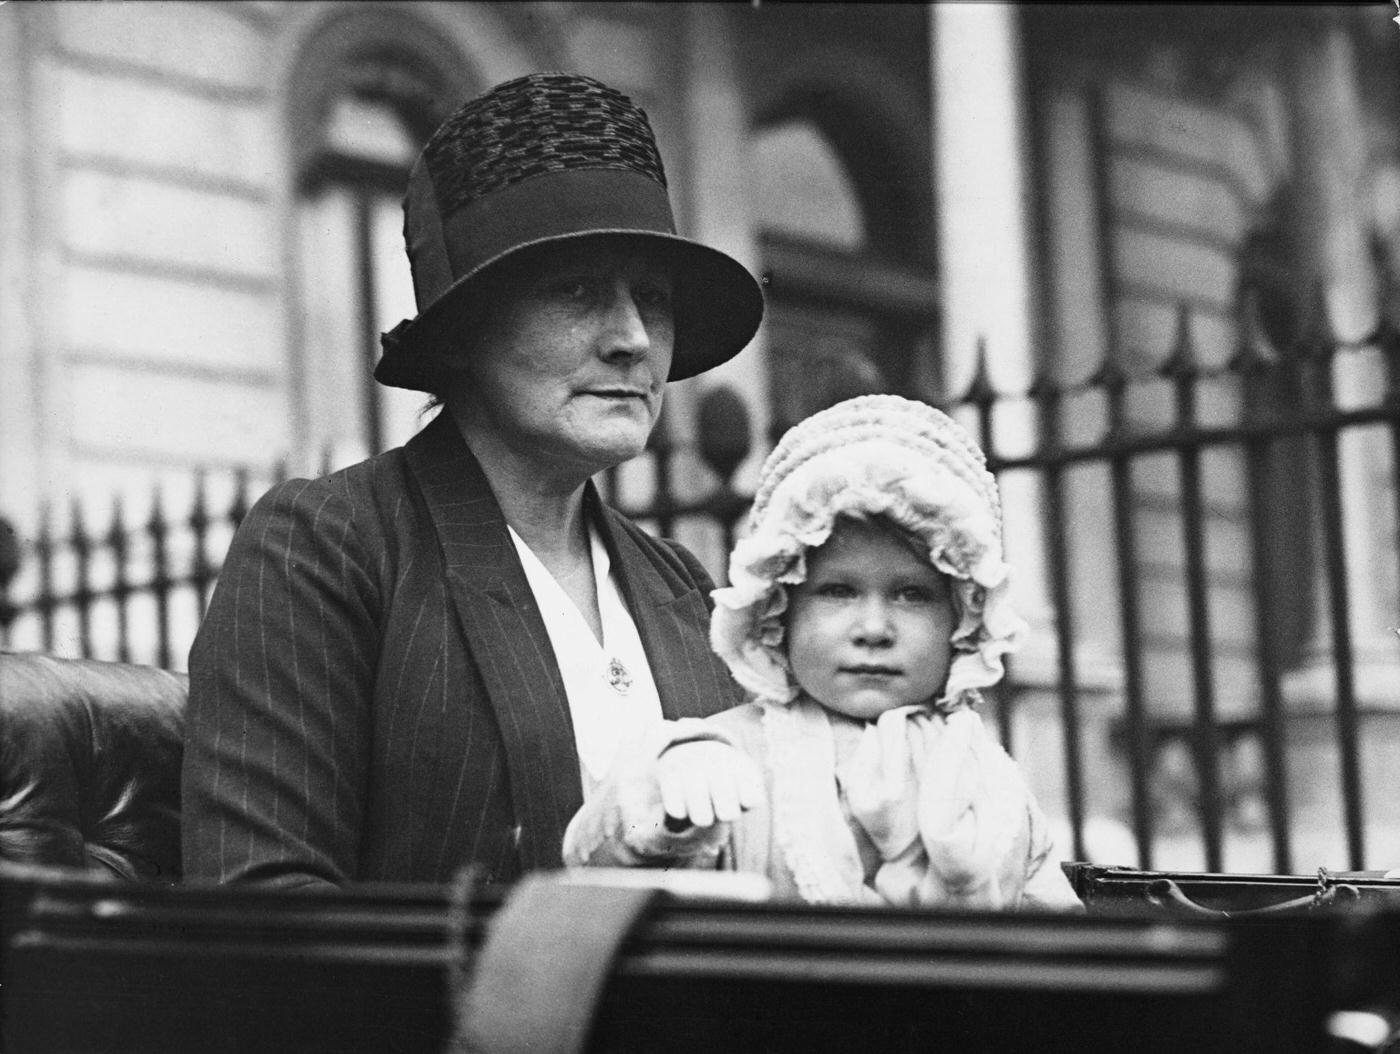 Princess Elizabeth and her nanny Clara Knight, seated together in a carriage for a drive from the Duke of York's house in Piccadilly, London, 1928.